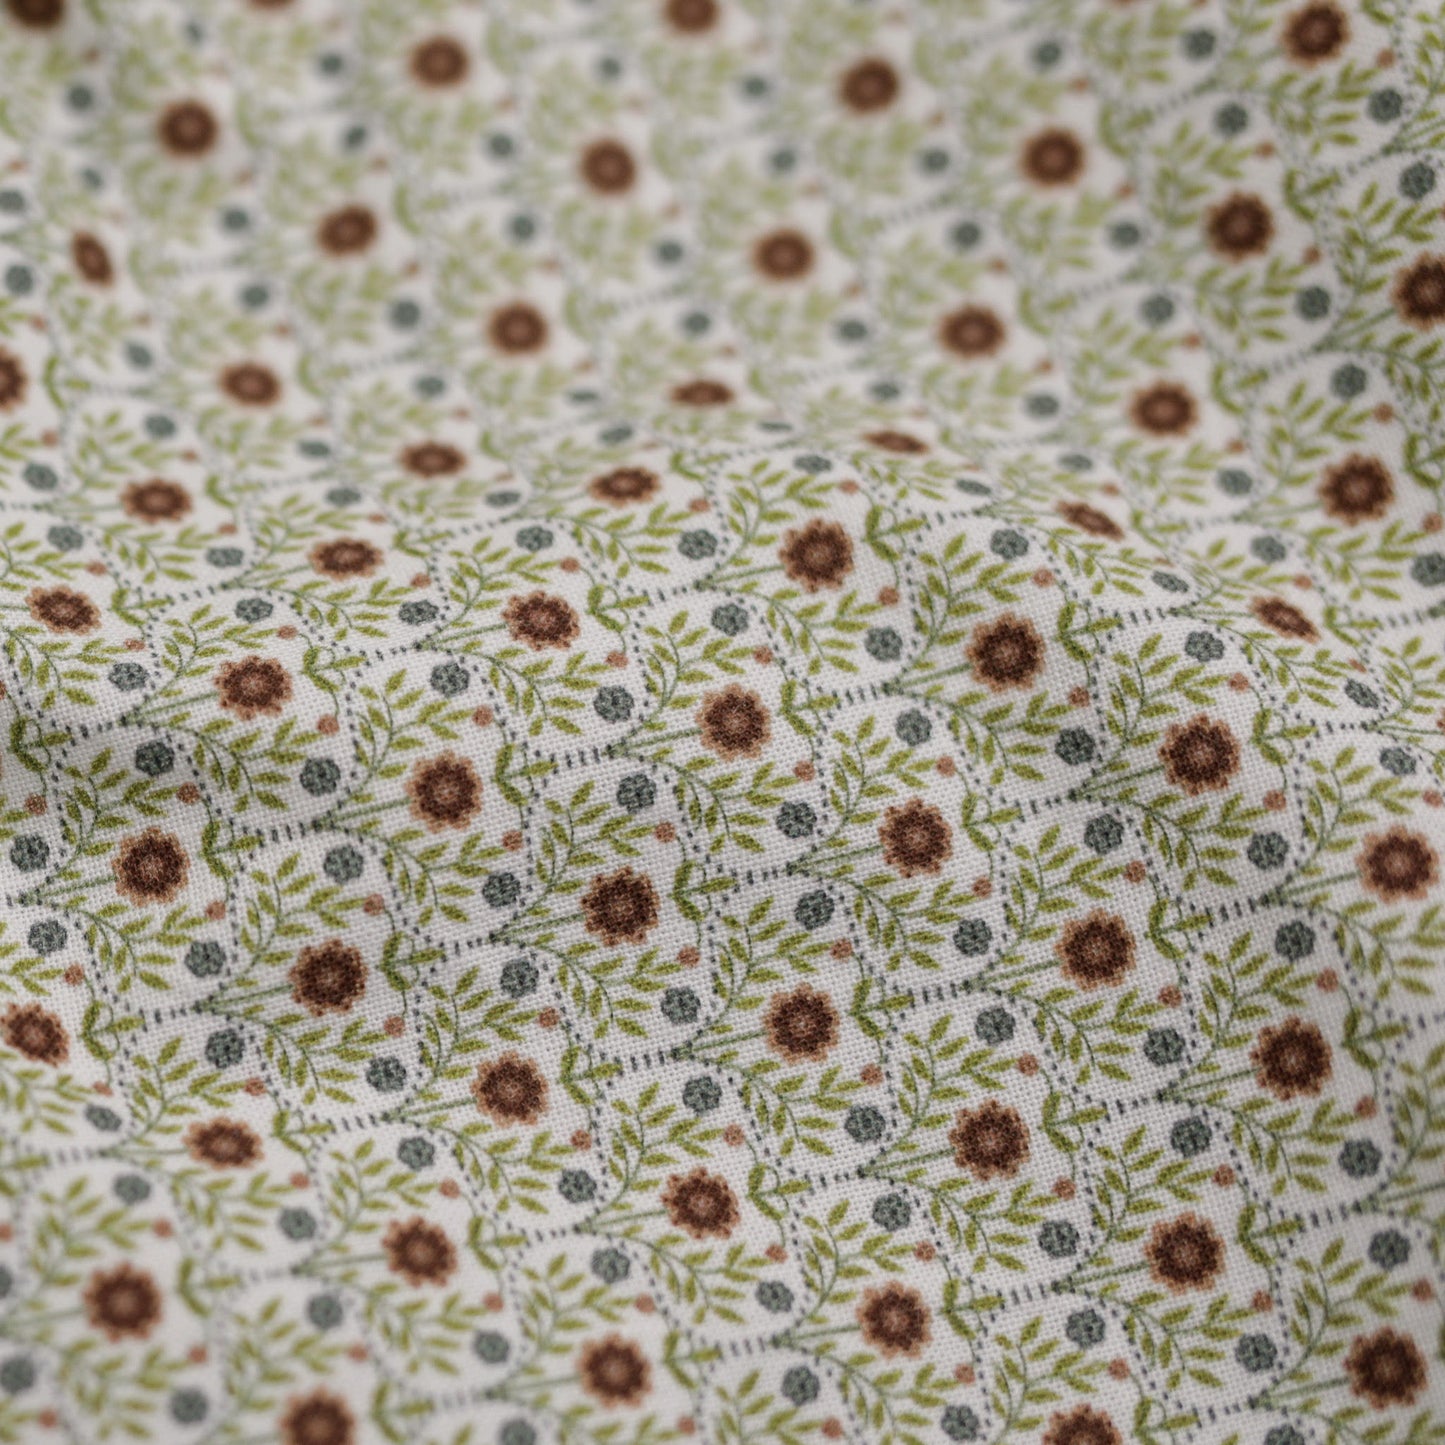 Designer's 100% cotton fabric "Floral ogee"